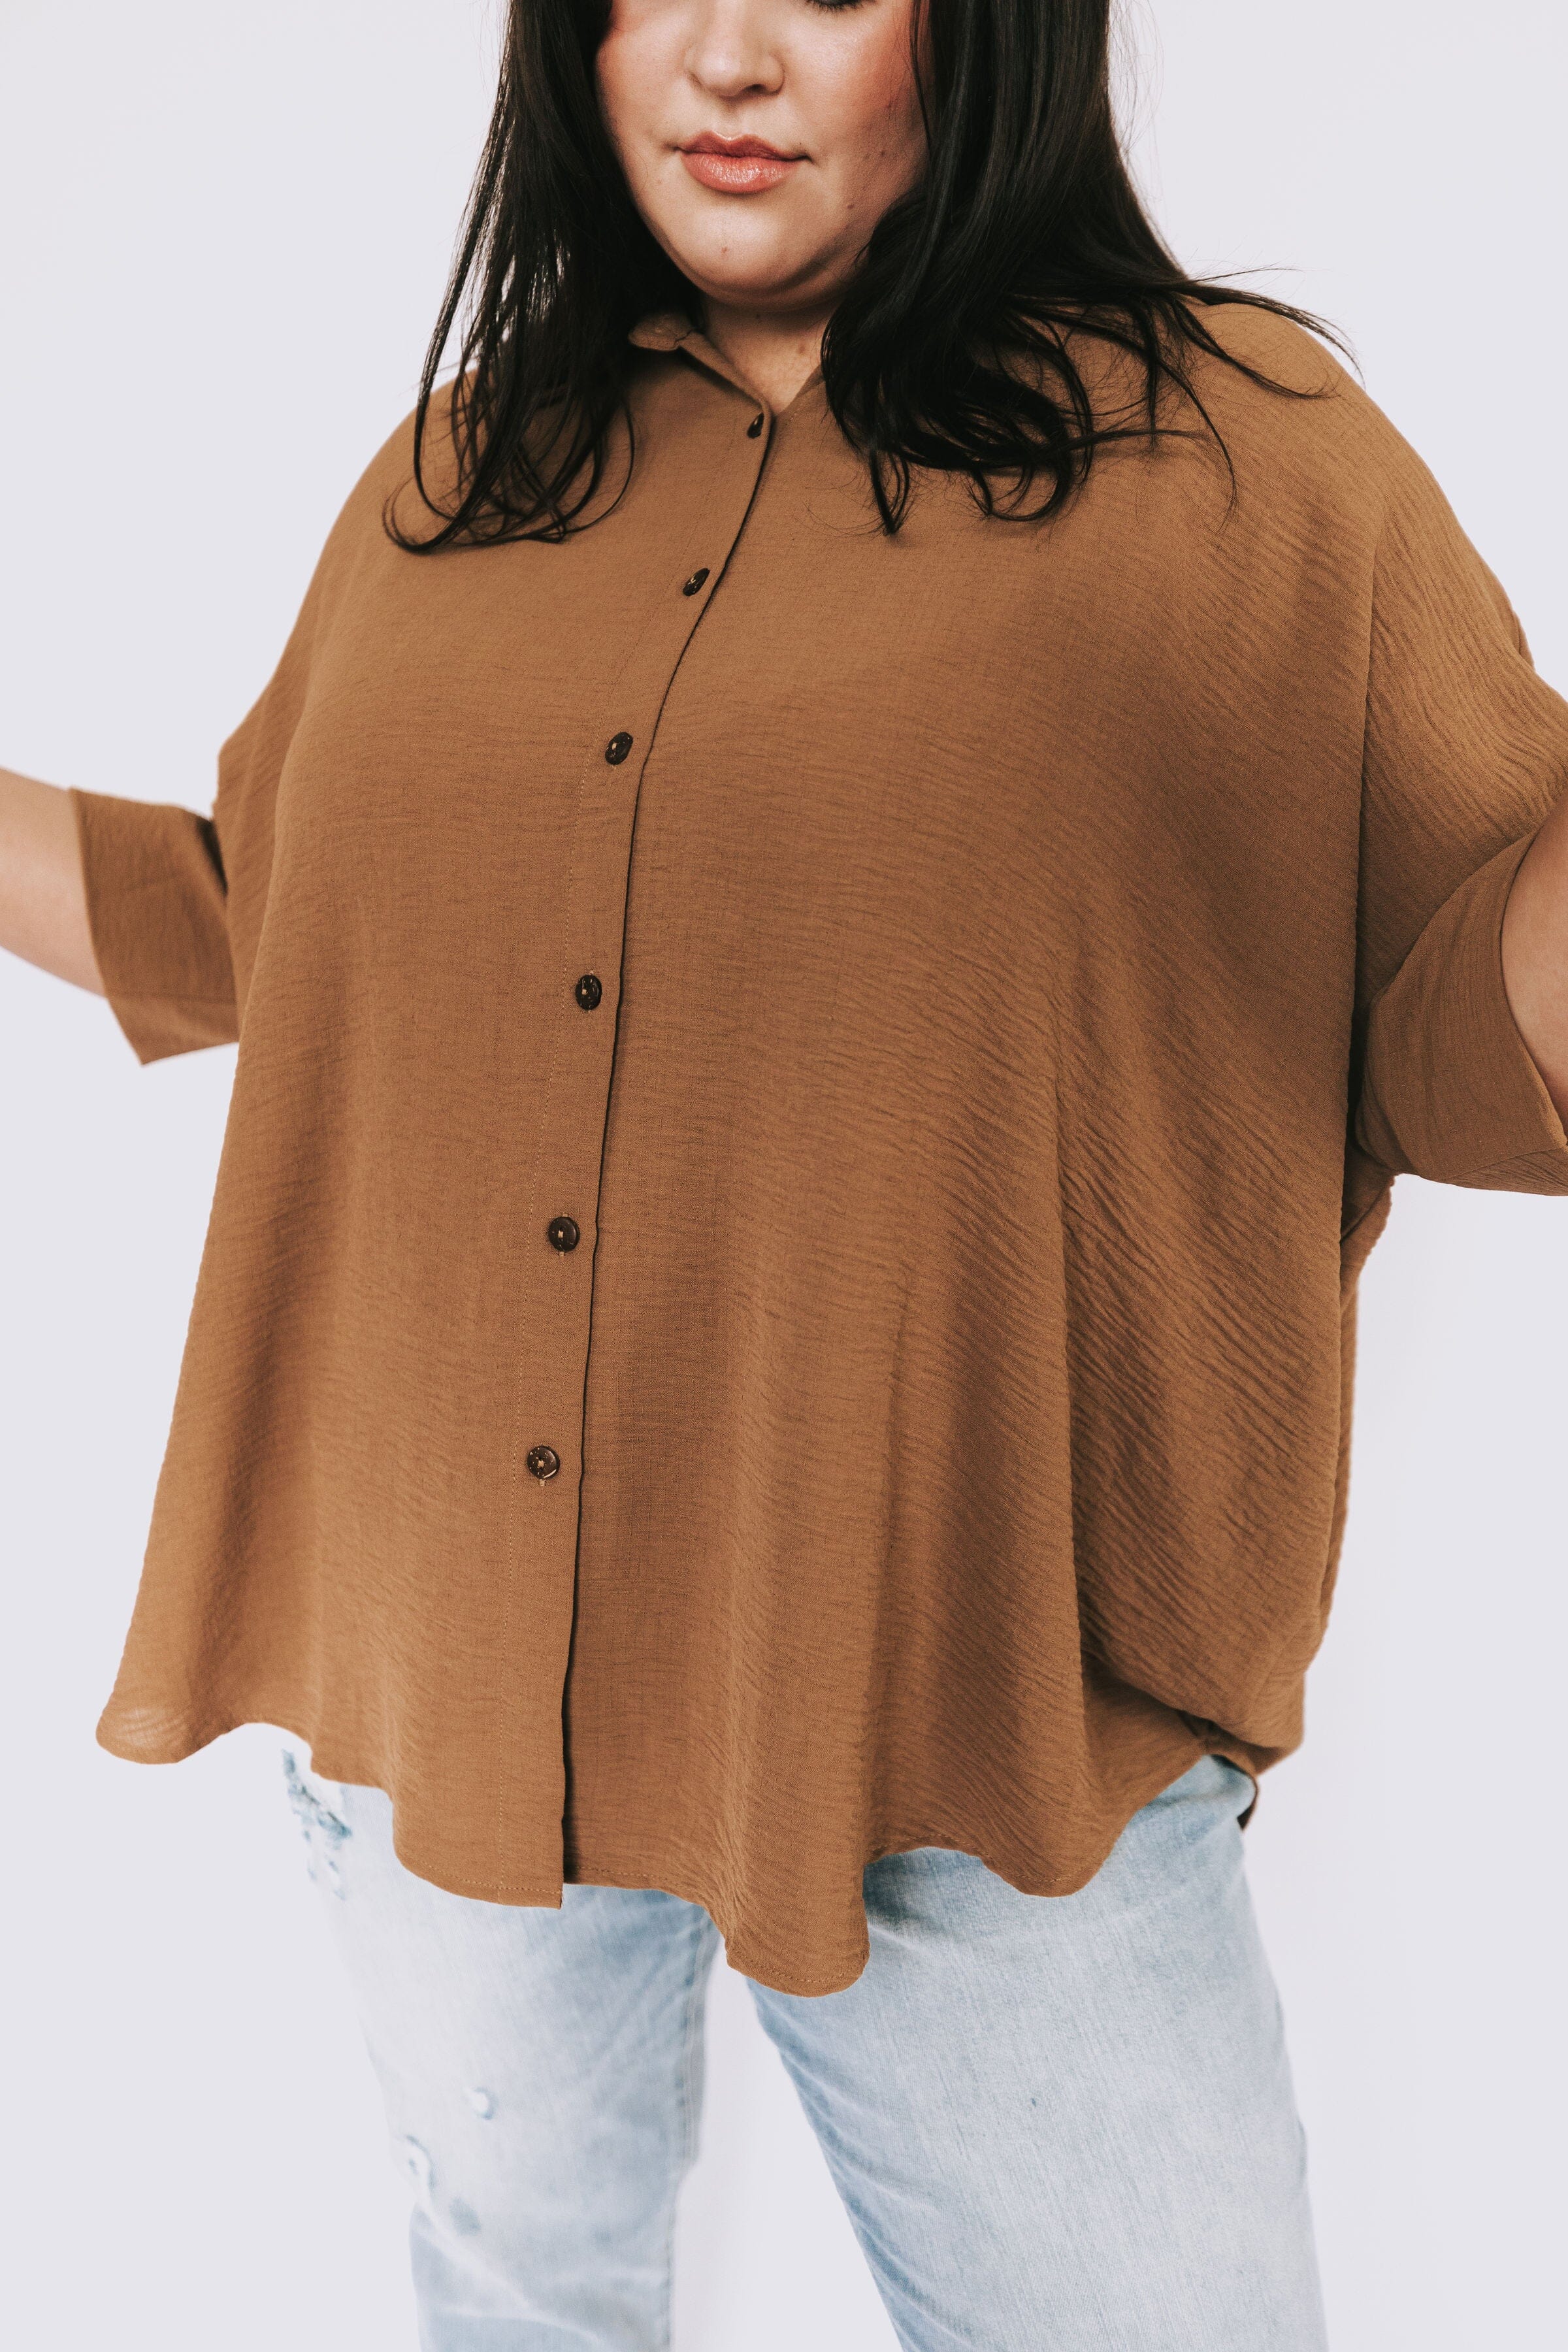 PLUS SIZE - Take In The View Top